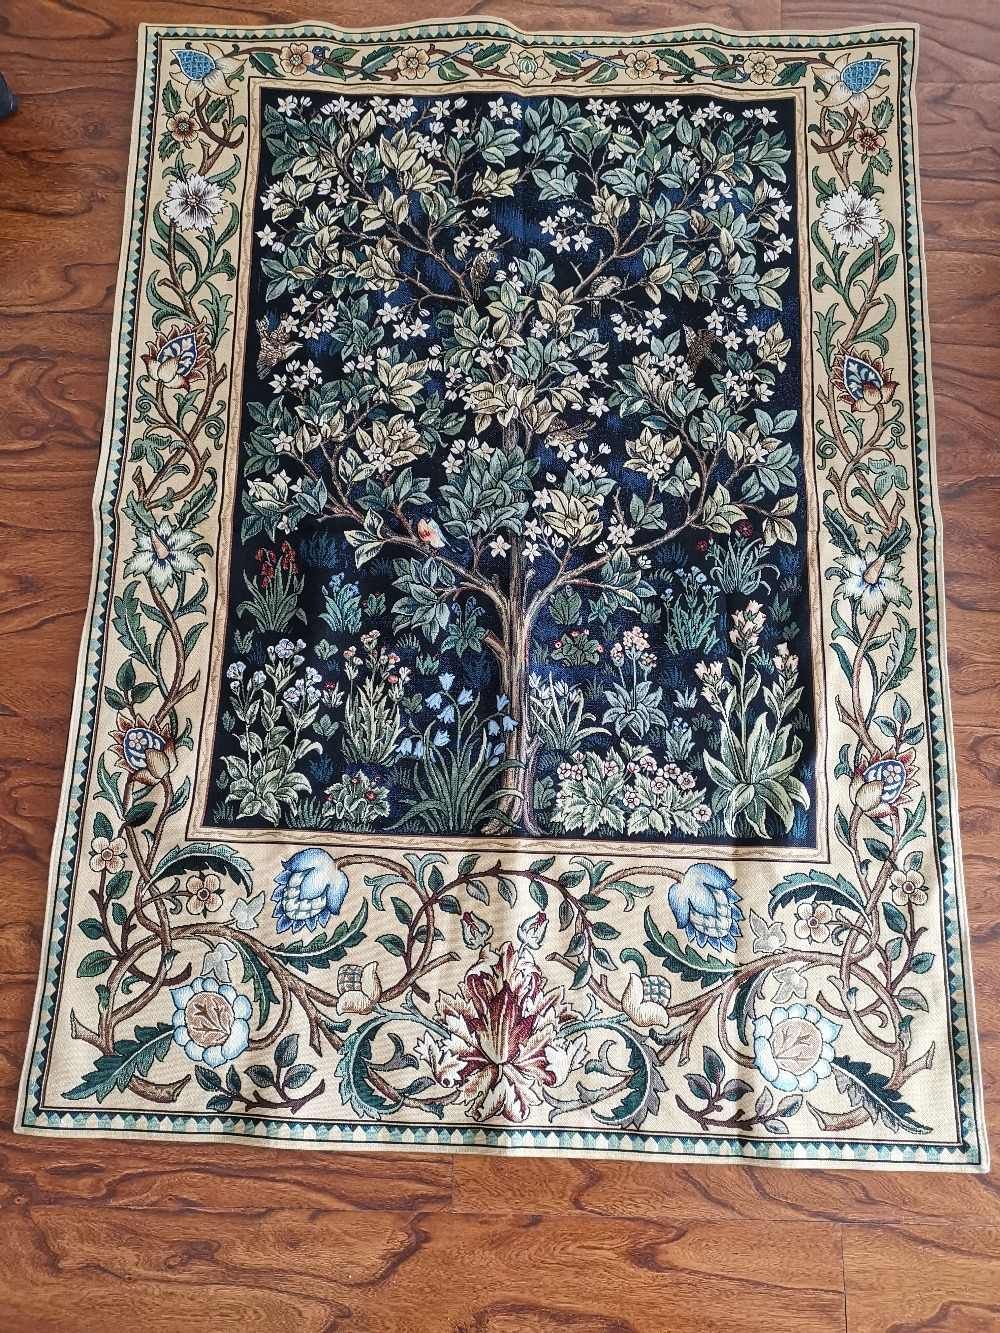 William Morris Blue Tree Of Life 140*107cm Antique Textile Decorative  Belgiu Wall Hanging Tapestry For Home Decorative Tapestry Throughout Best And Newest Blended Fabric Tree Of Life, William Morris Wall Hangings (View 10 of 20)